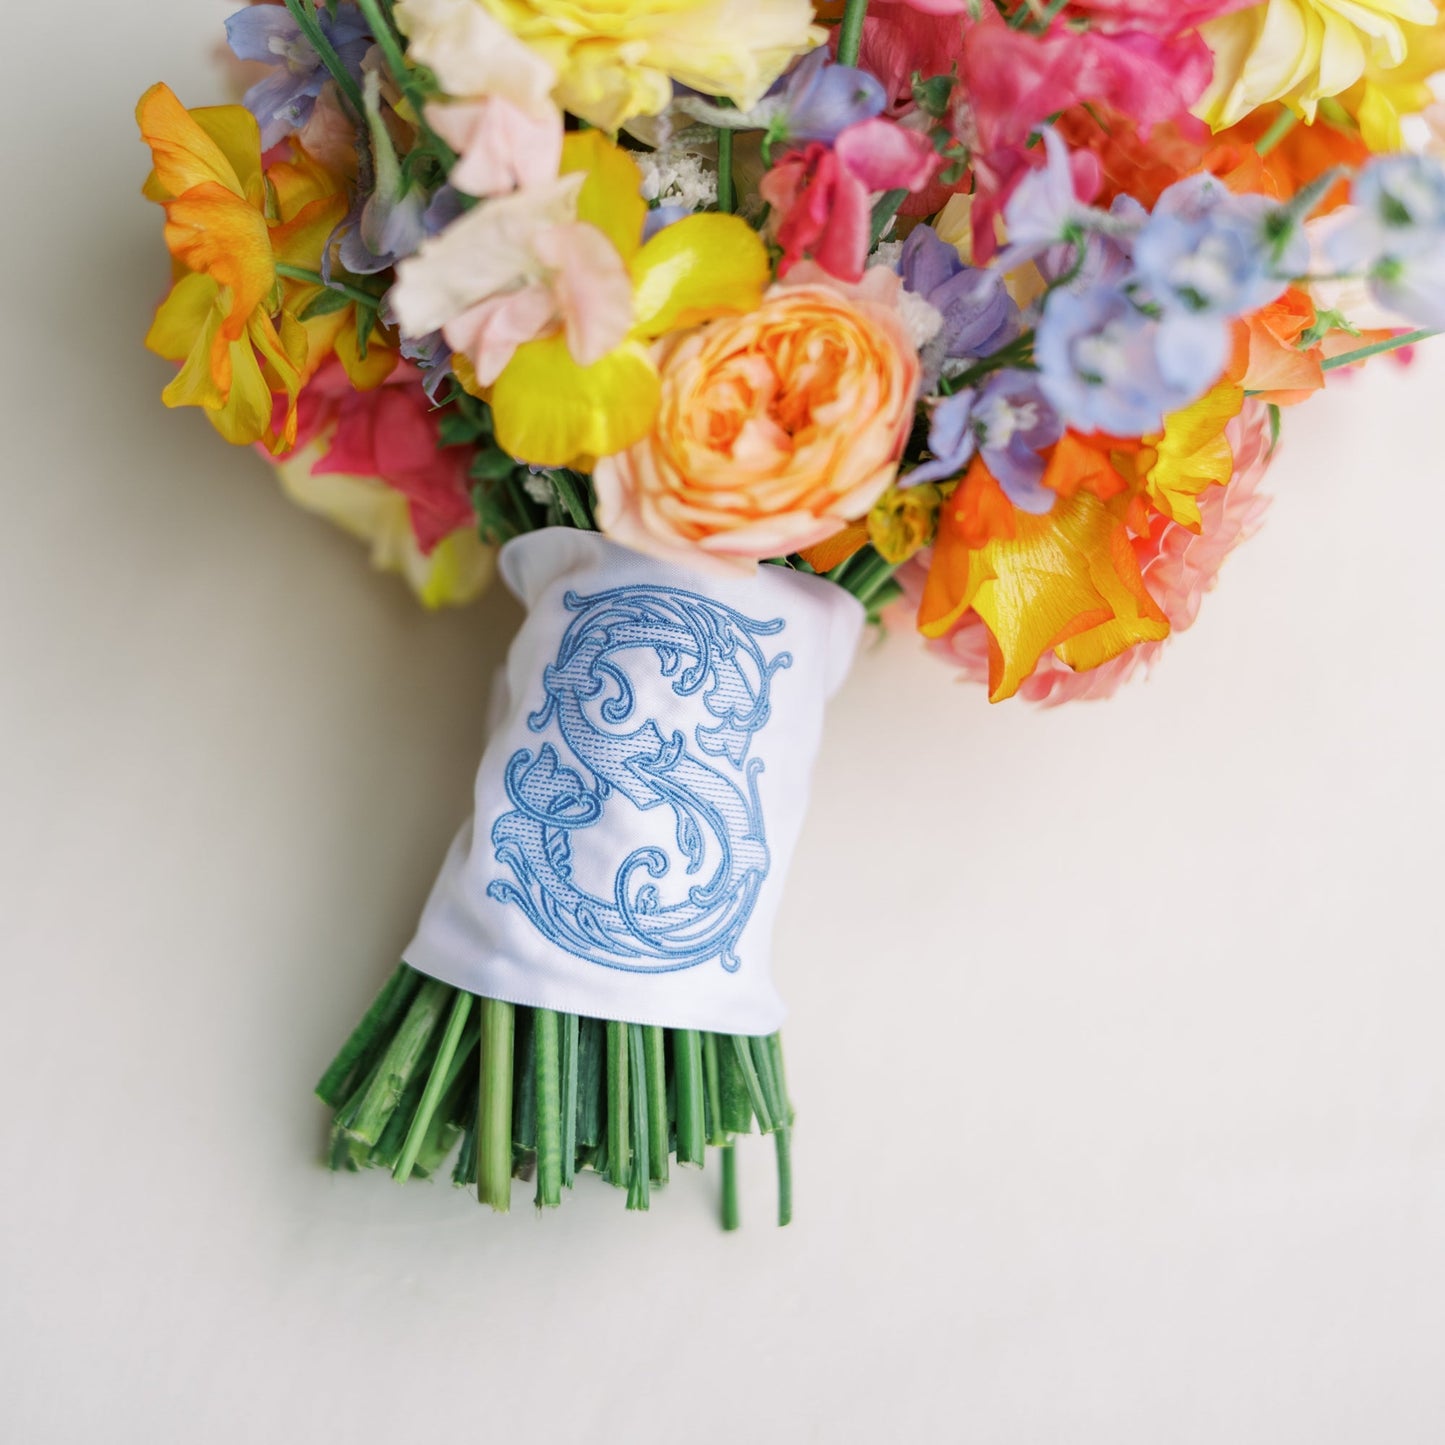 Custom Embroidered Bouquet Wrap with Single Letter Vine Monogram